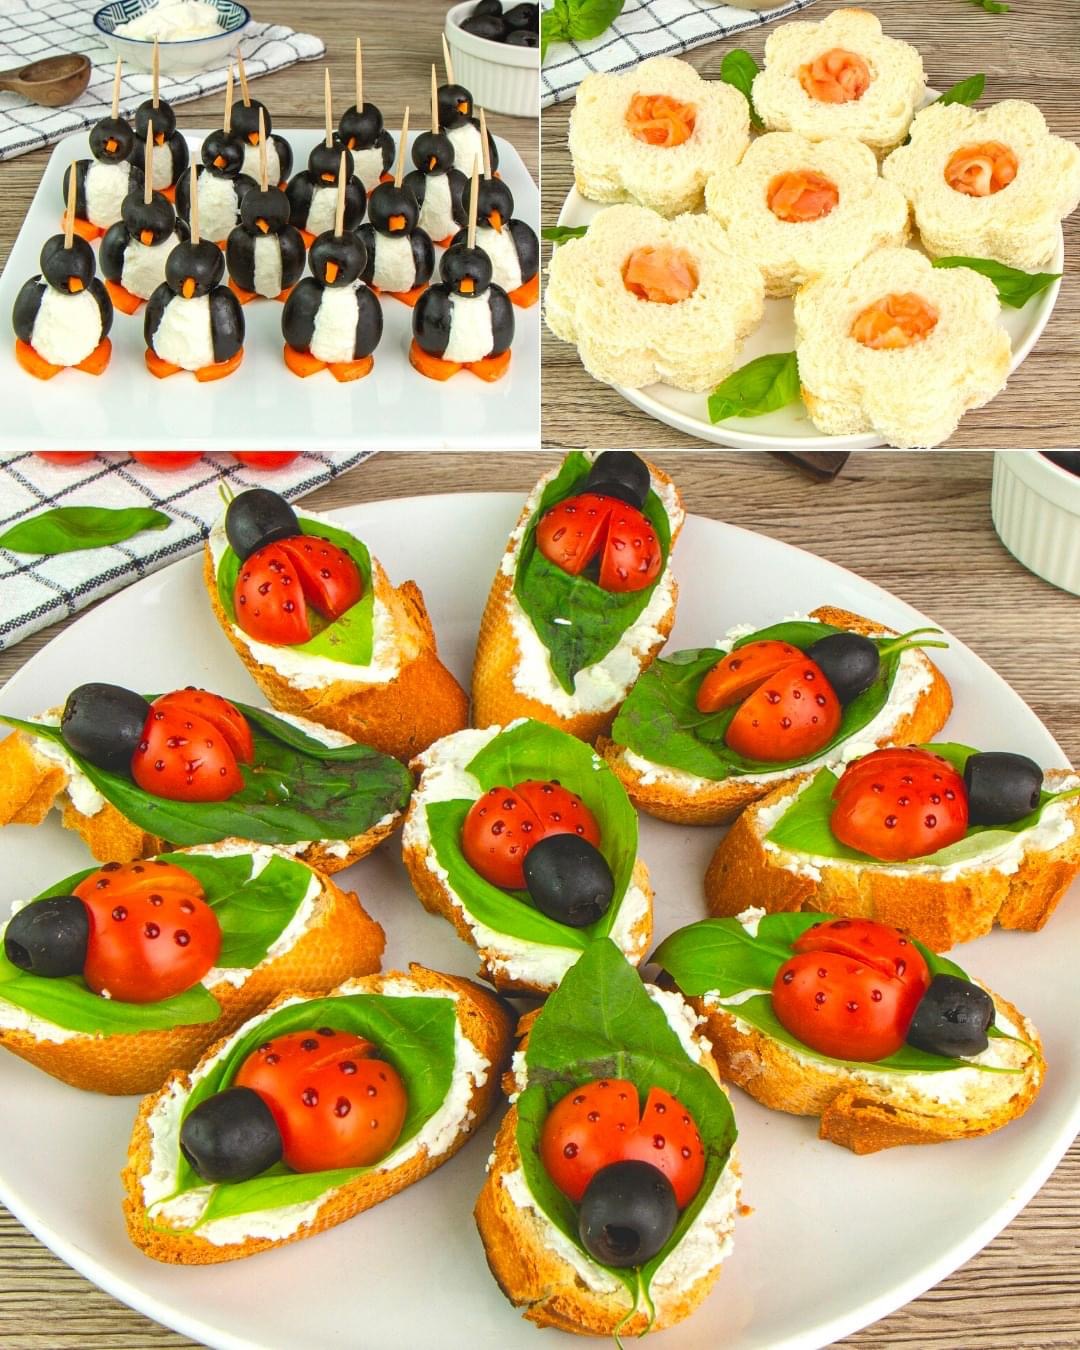 3 incredible ideas for your Christmas appetizer